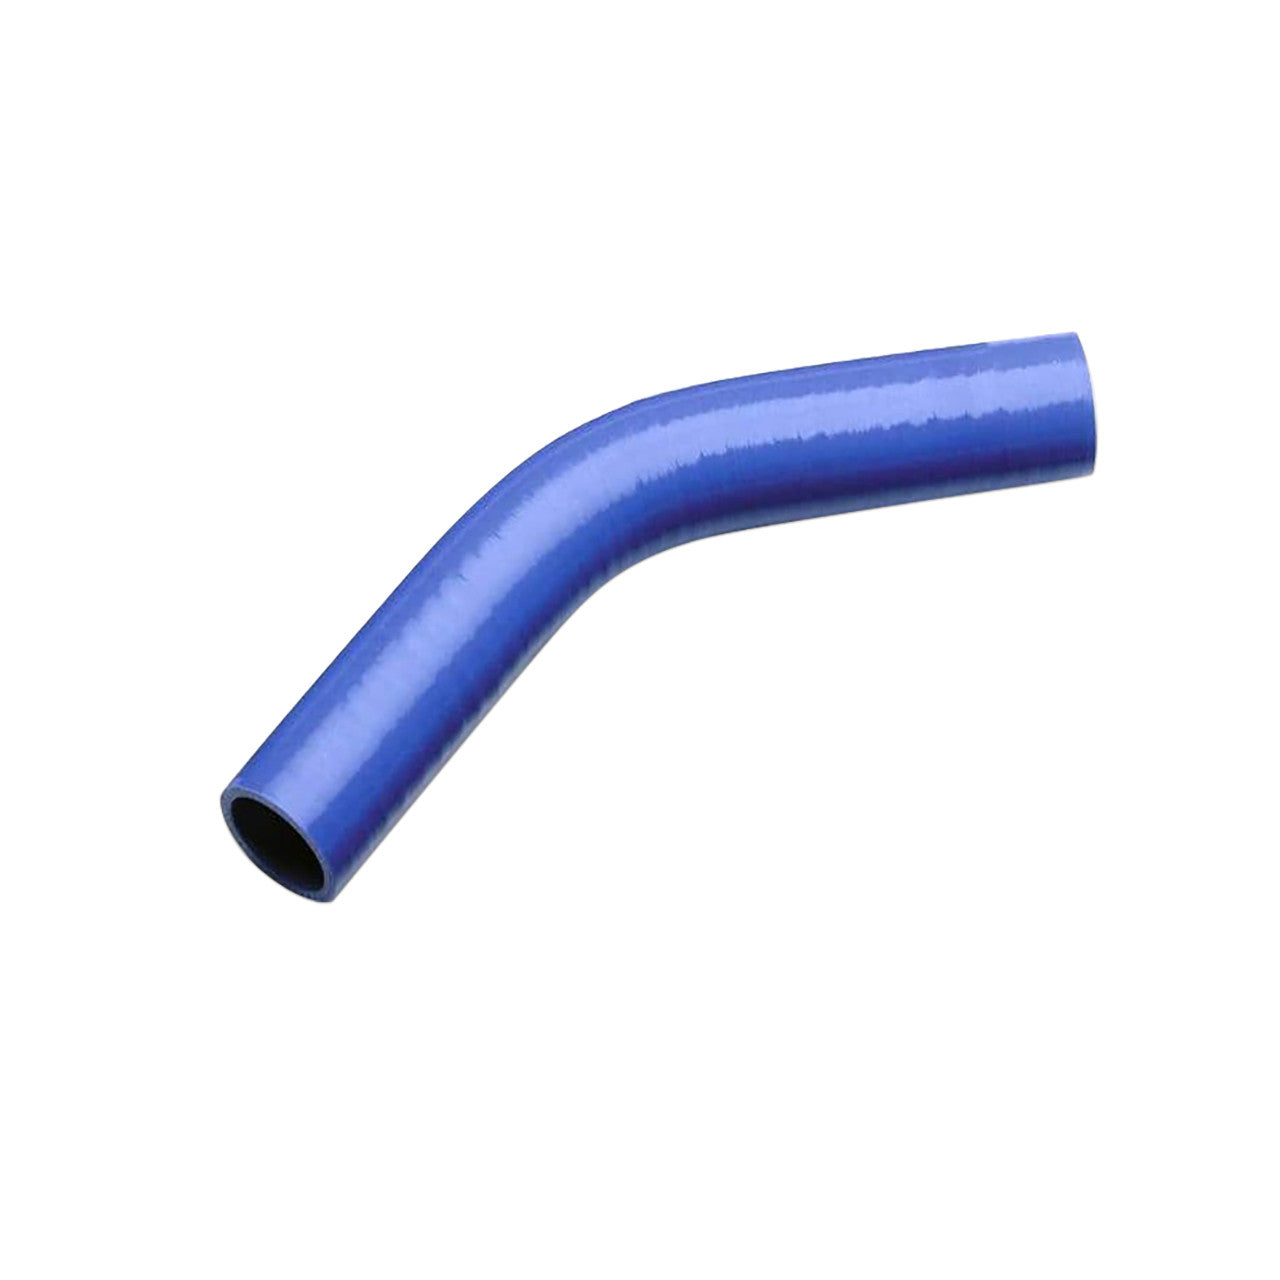 SHB5190 Silicone Hose 90 Degree - 51mm or 2 I.d - Western Filters